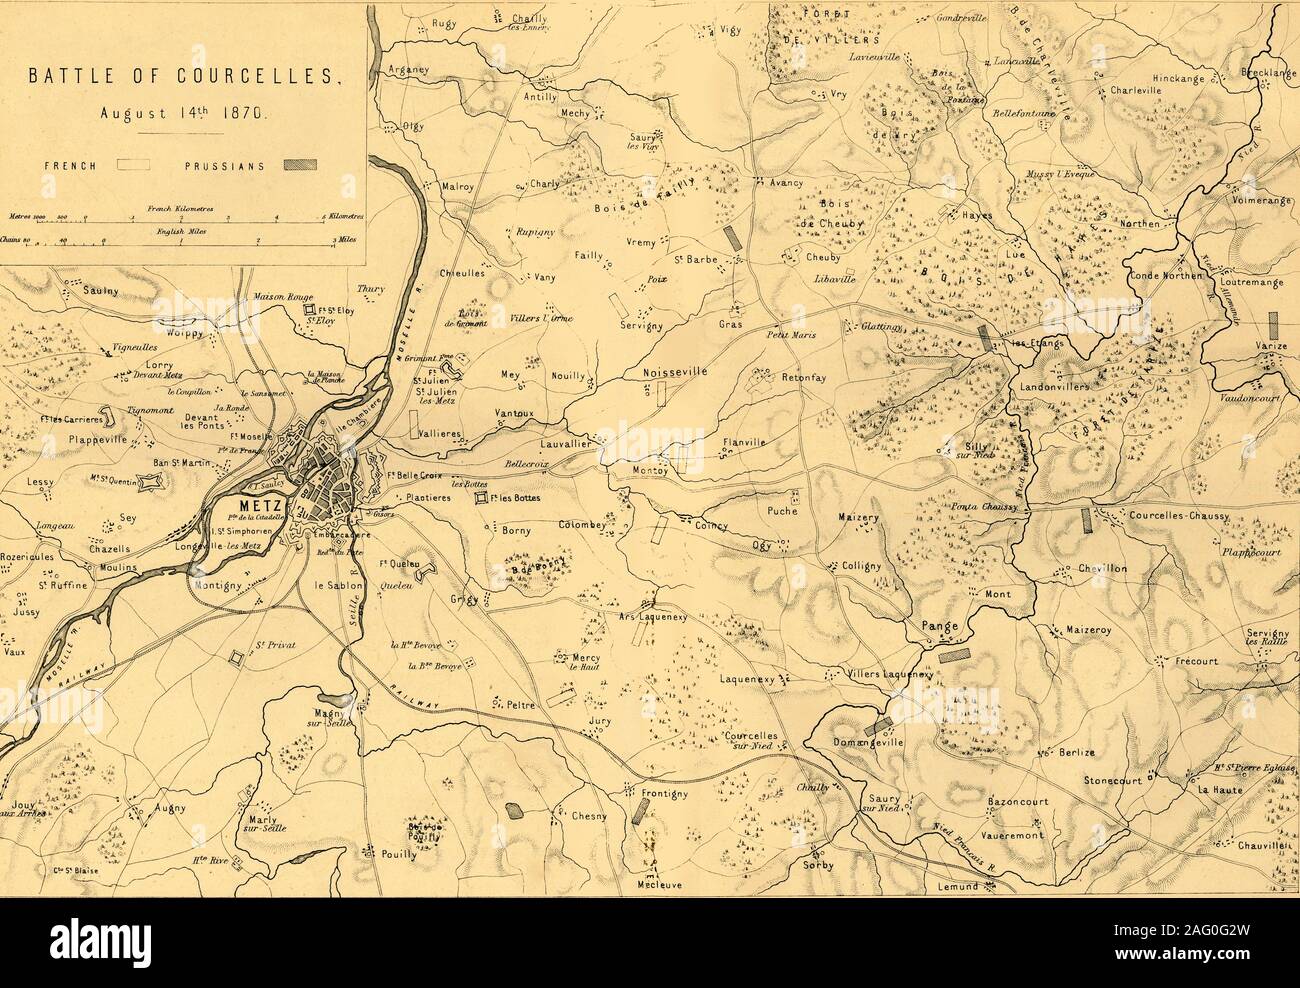 Map of the Battle of Courcelles, 14 August 1870, (c1872). Map: 'Drawn under the Superintendance of Captain Hozier', showing the enemy positions. The Battle of Borny-Colombey, (also known as the Battle of Colombey-Nouilly or the Battle of Courcelles), was fought near Metz (in France) between the French under Fran&#xe7;ois Bazaine, and the Prussians under Prince Frederick Charles. From &quot;The Franco-Prussian War: its causes, incidents and consequences&quot;, Volume I, by Captain H M Hozier. [William Mackenzie, London, 1872] Stock Photo